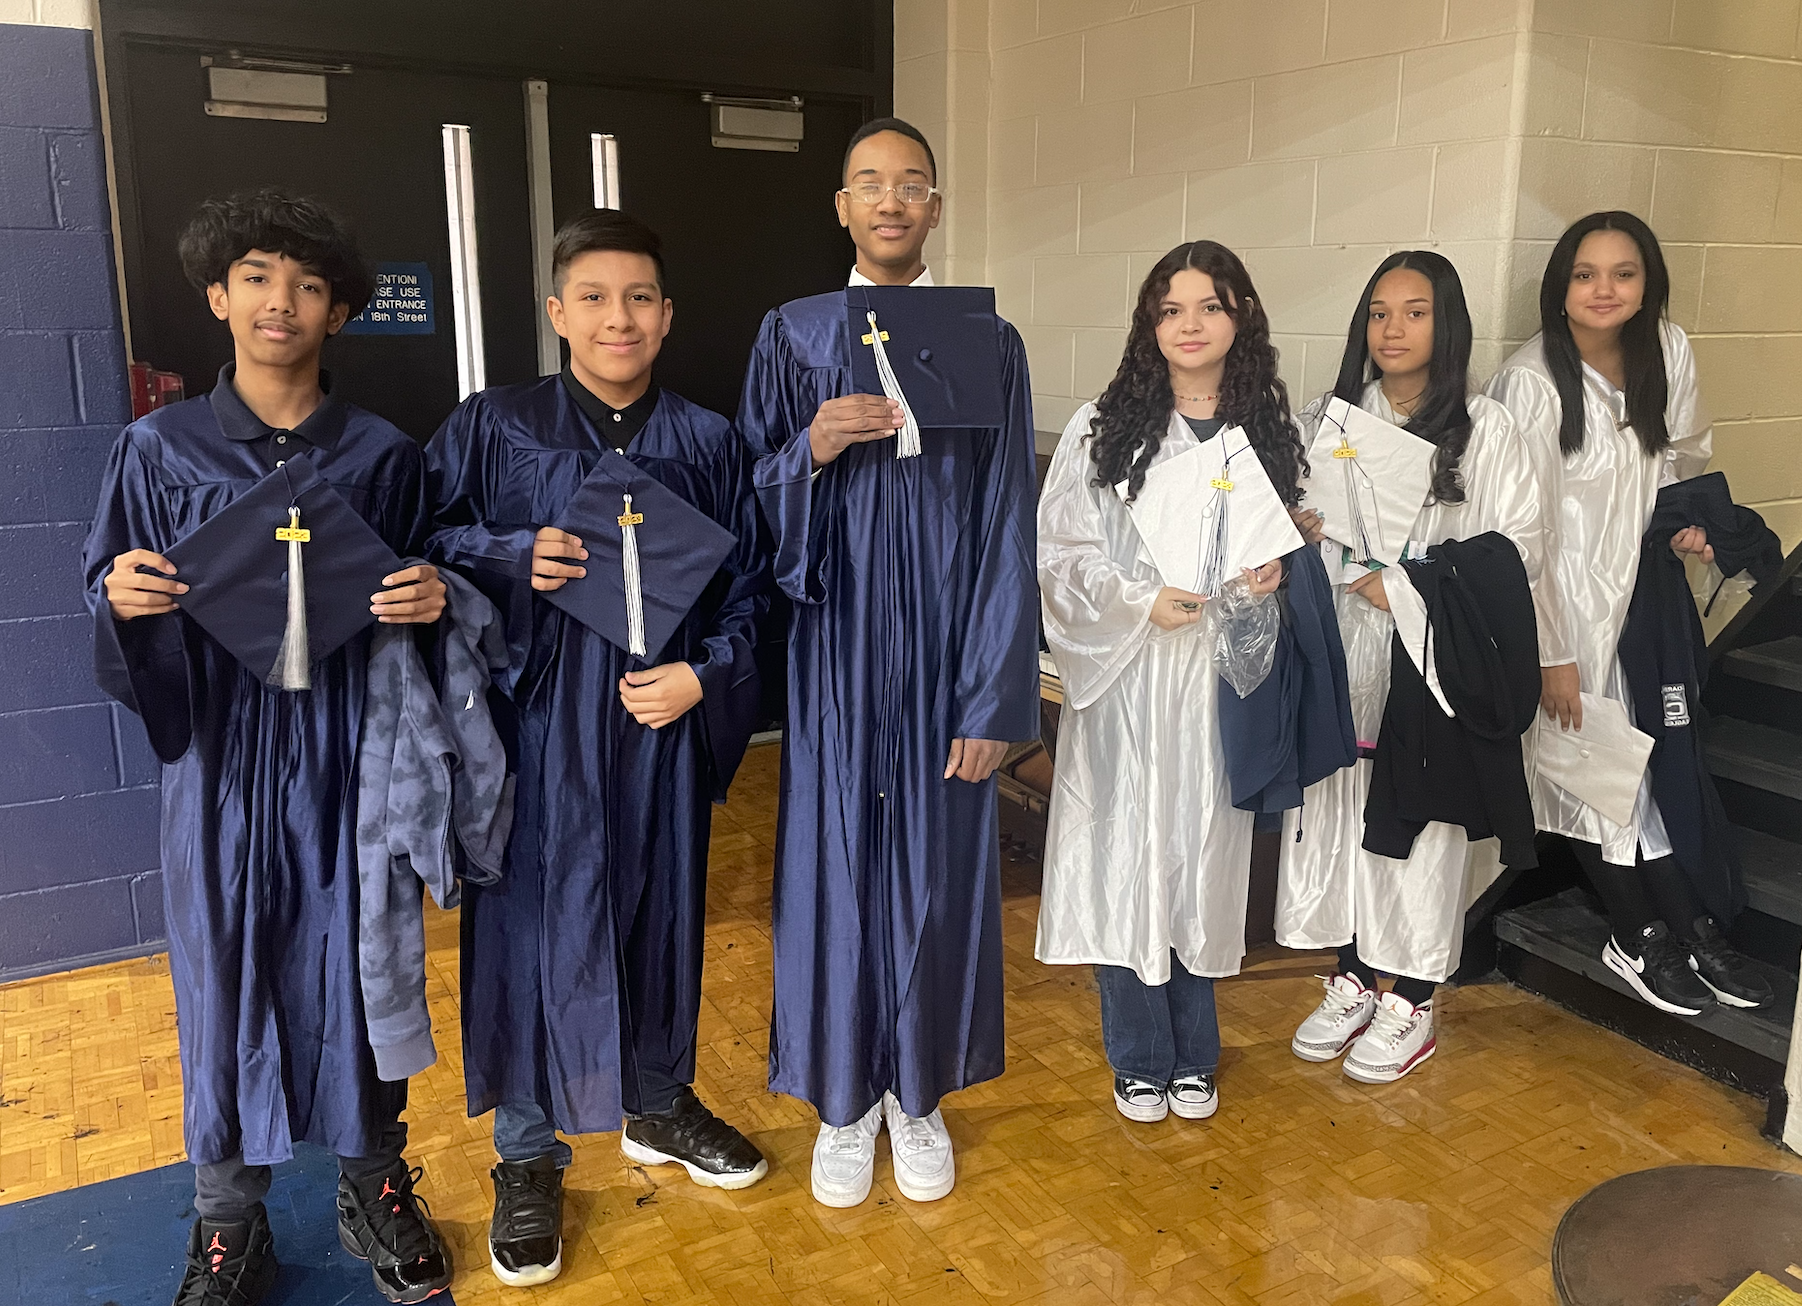 Graduation Picture Day at the Emerson Middle School